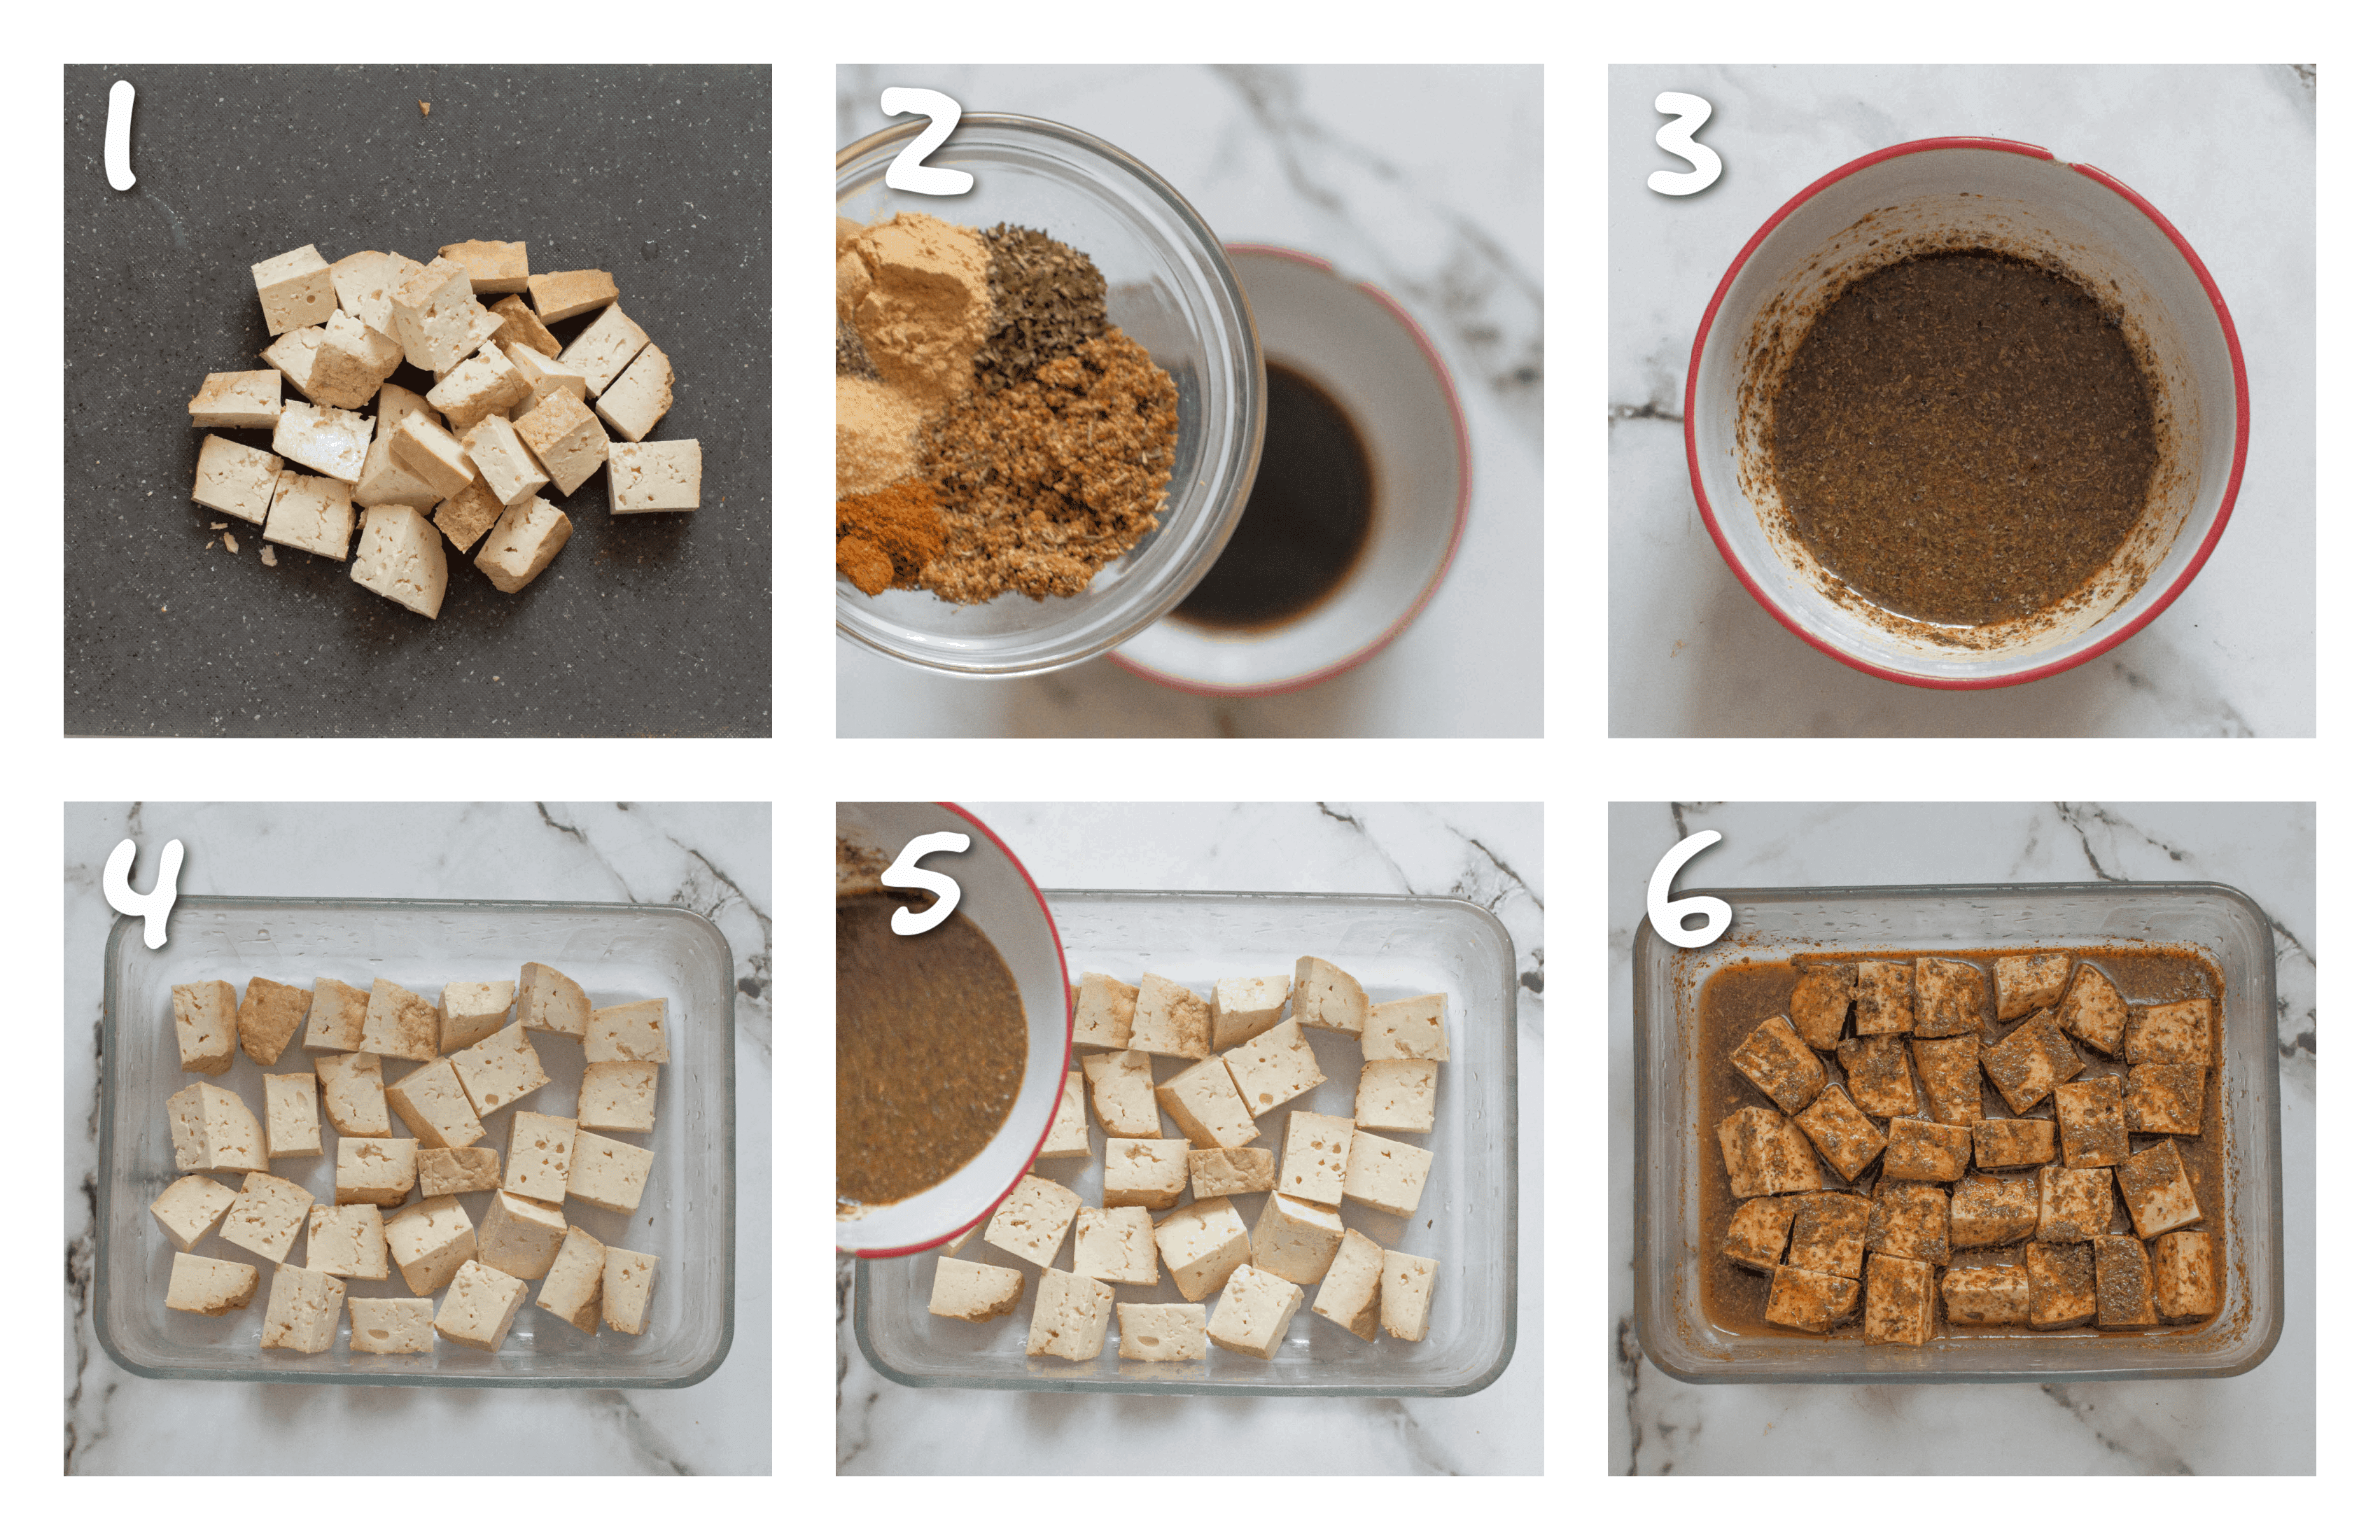 steps1-6 marinating and cooking the tofu